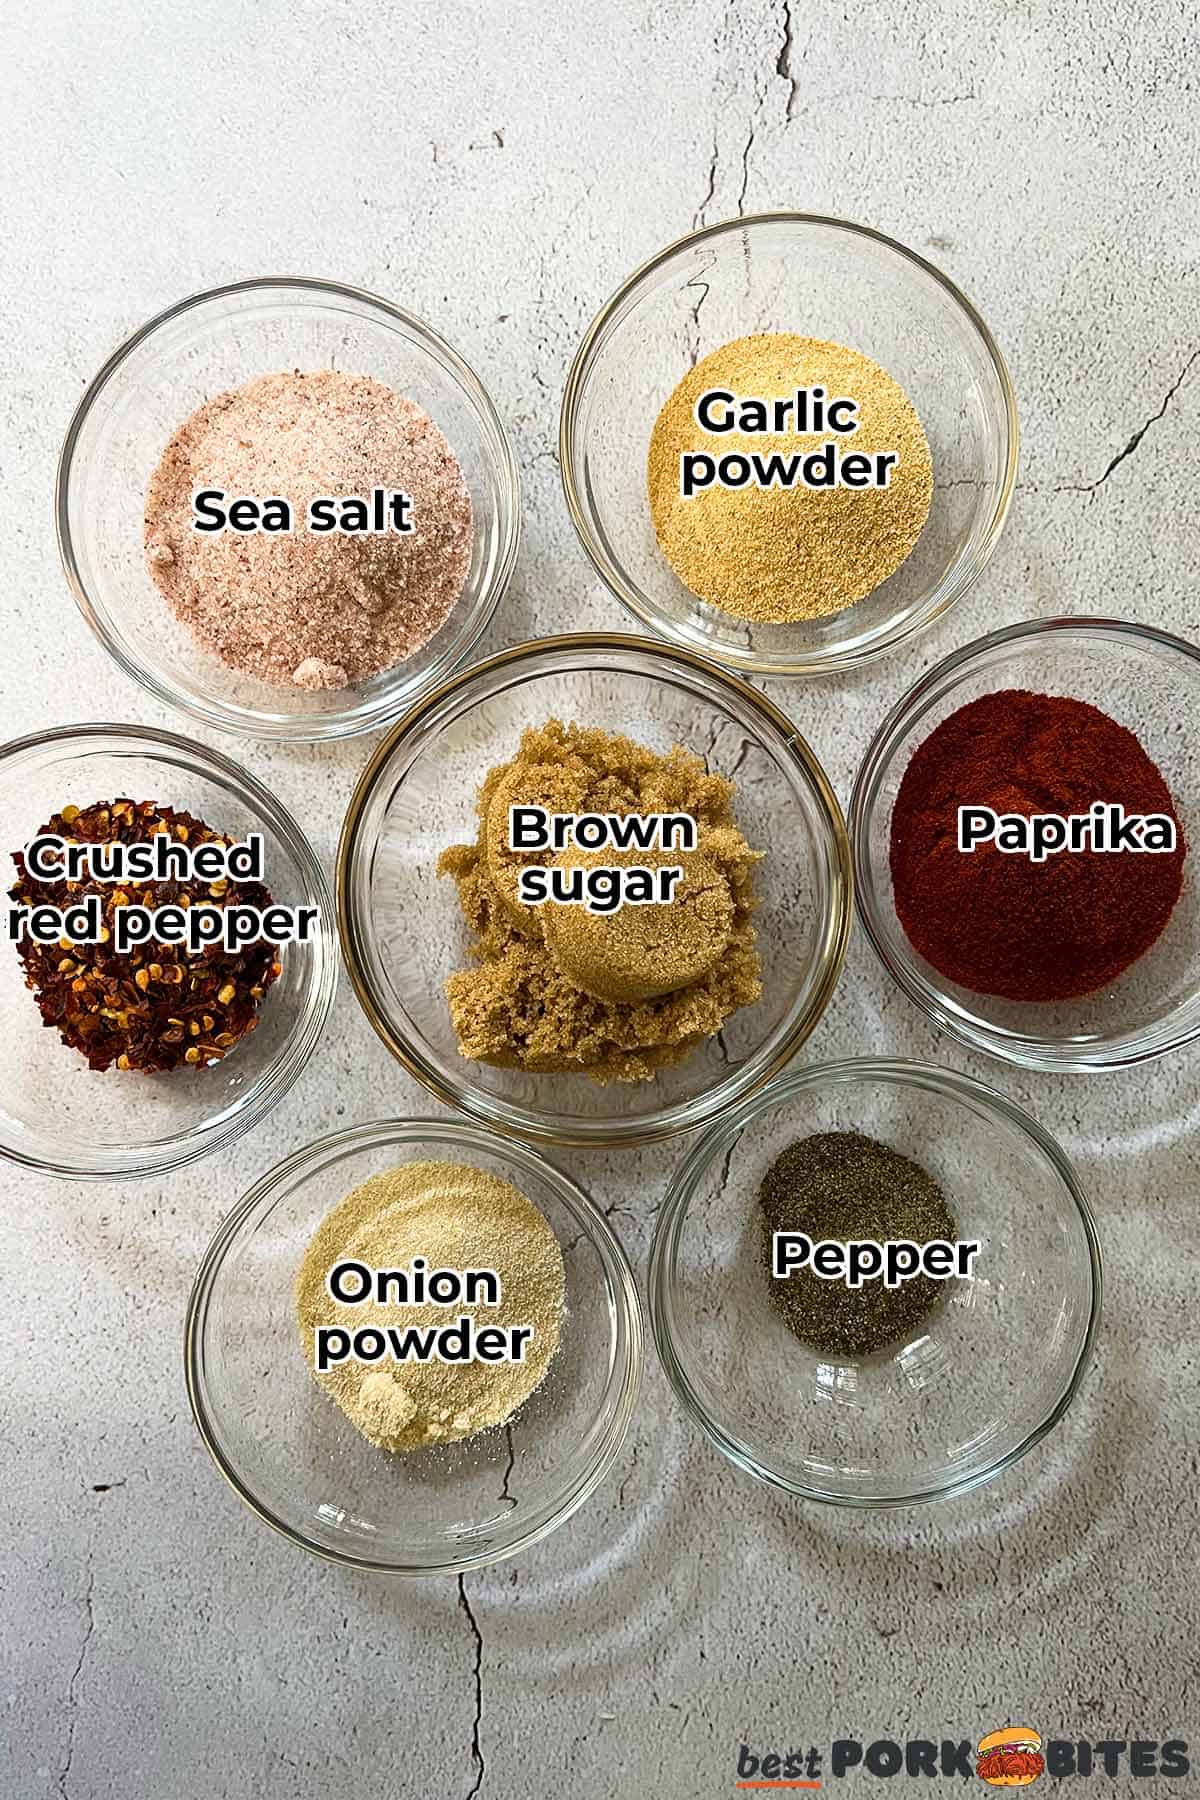 all the ingredients for pork chop seasoning in separate glass bowls with labels